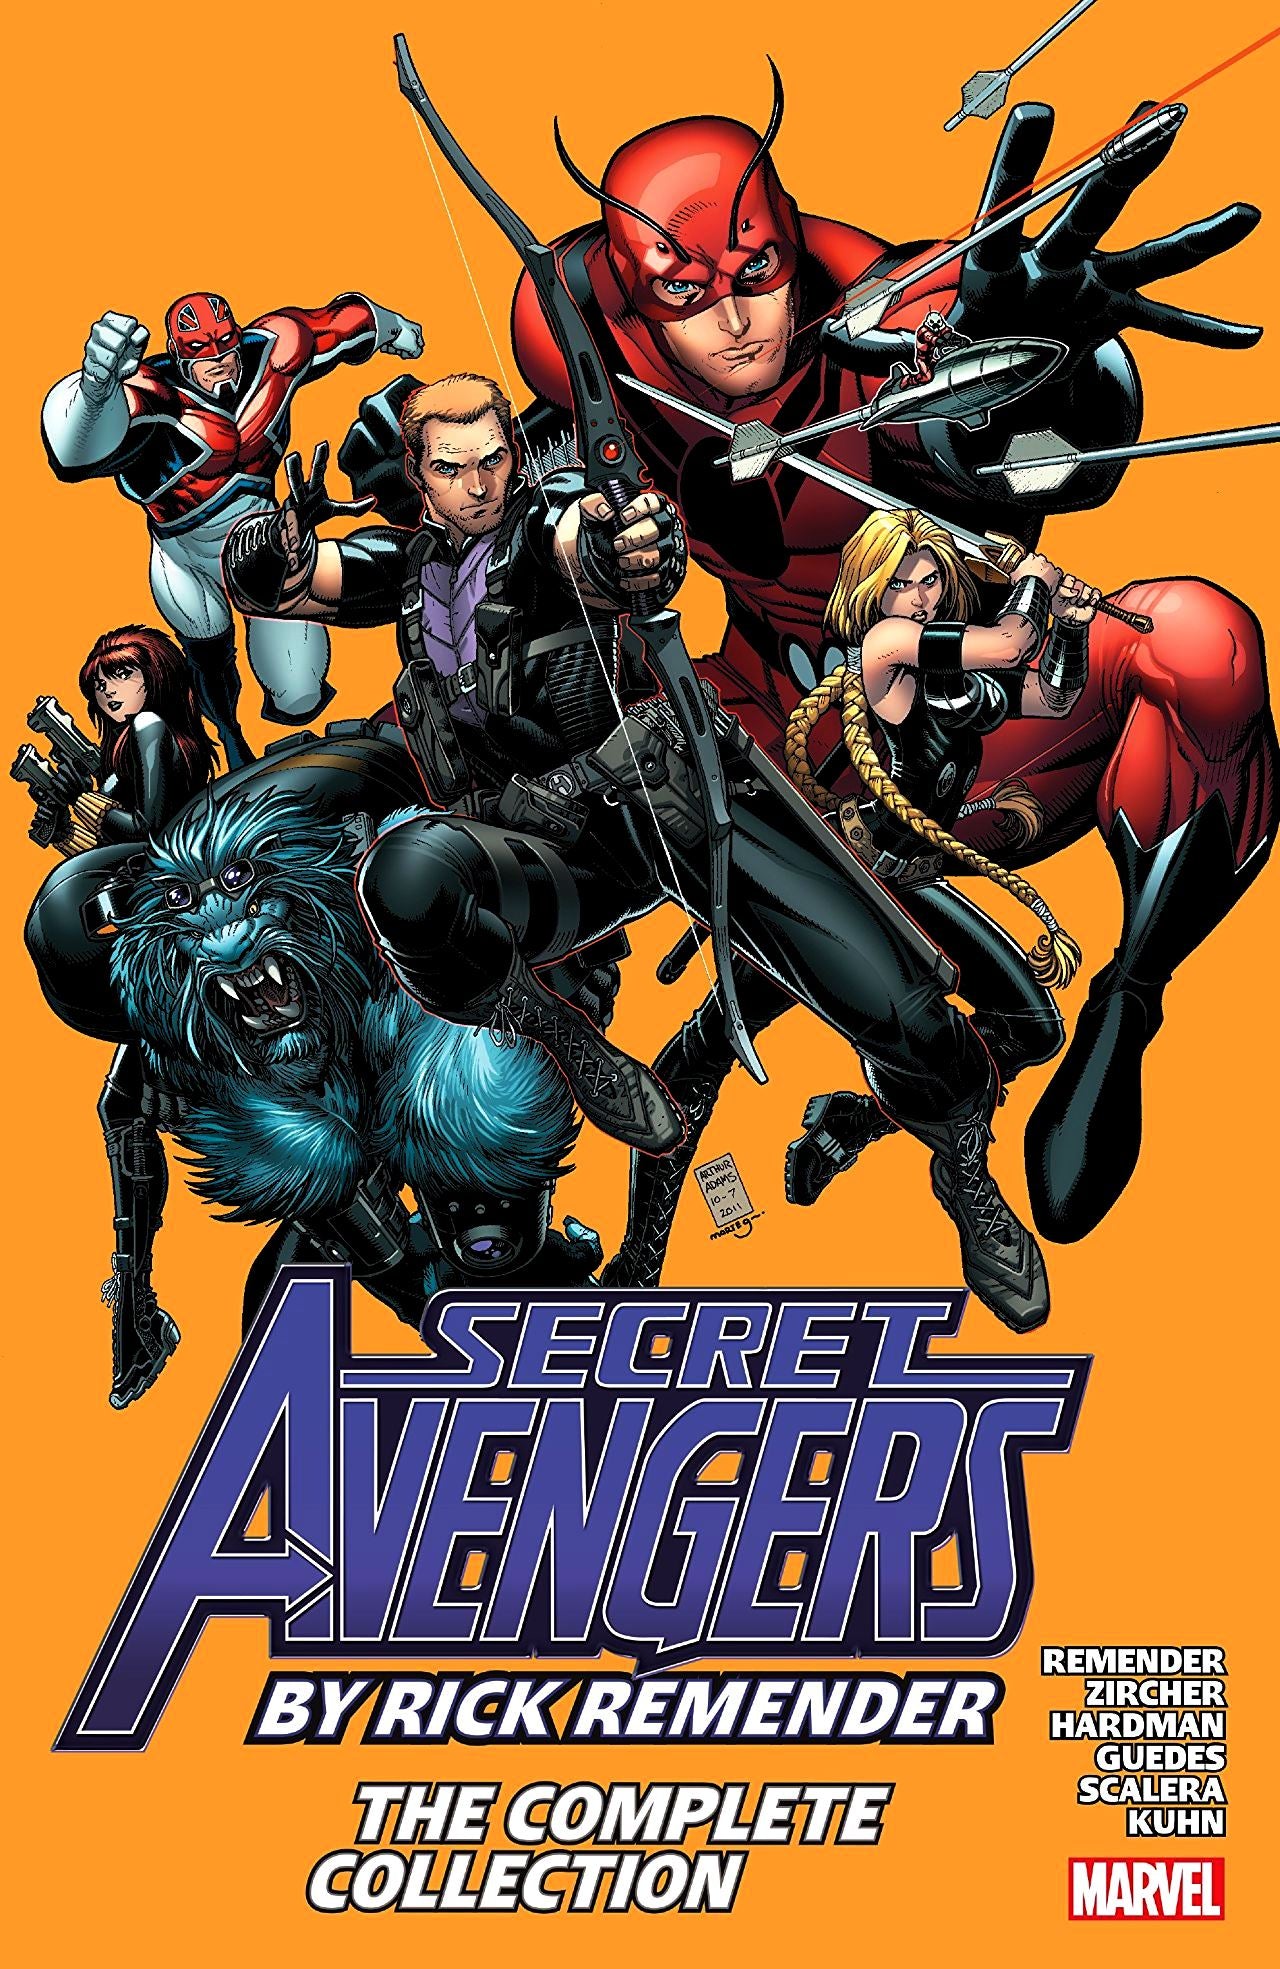 Secret Avengers (2010) by Rick Remender - The Complete Collection